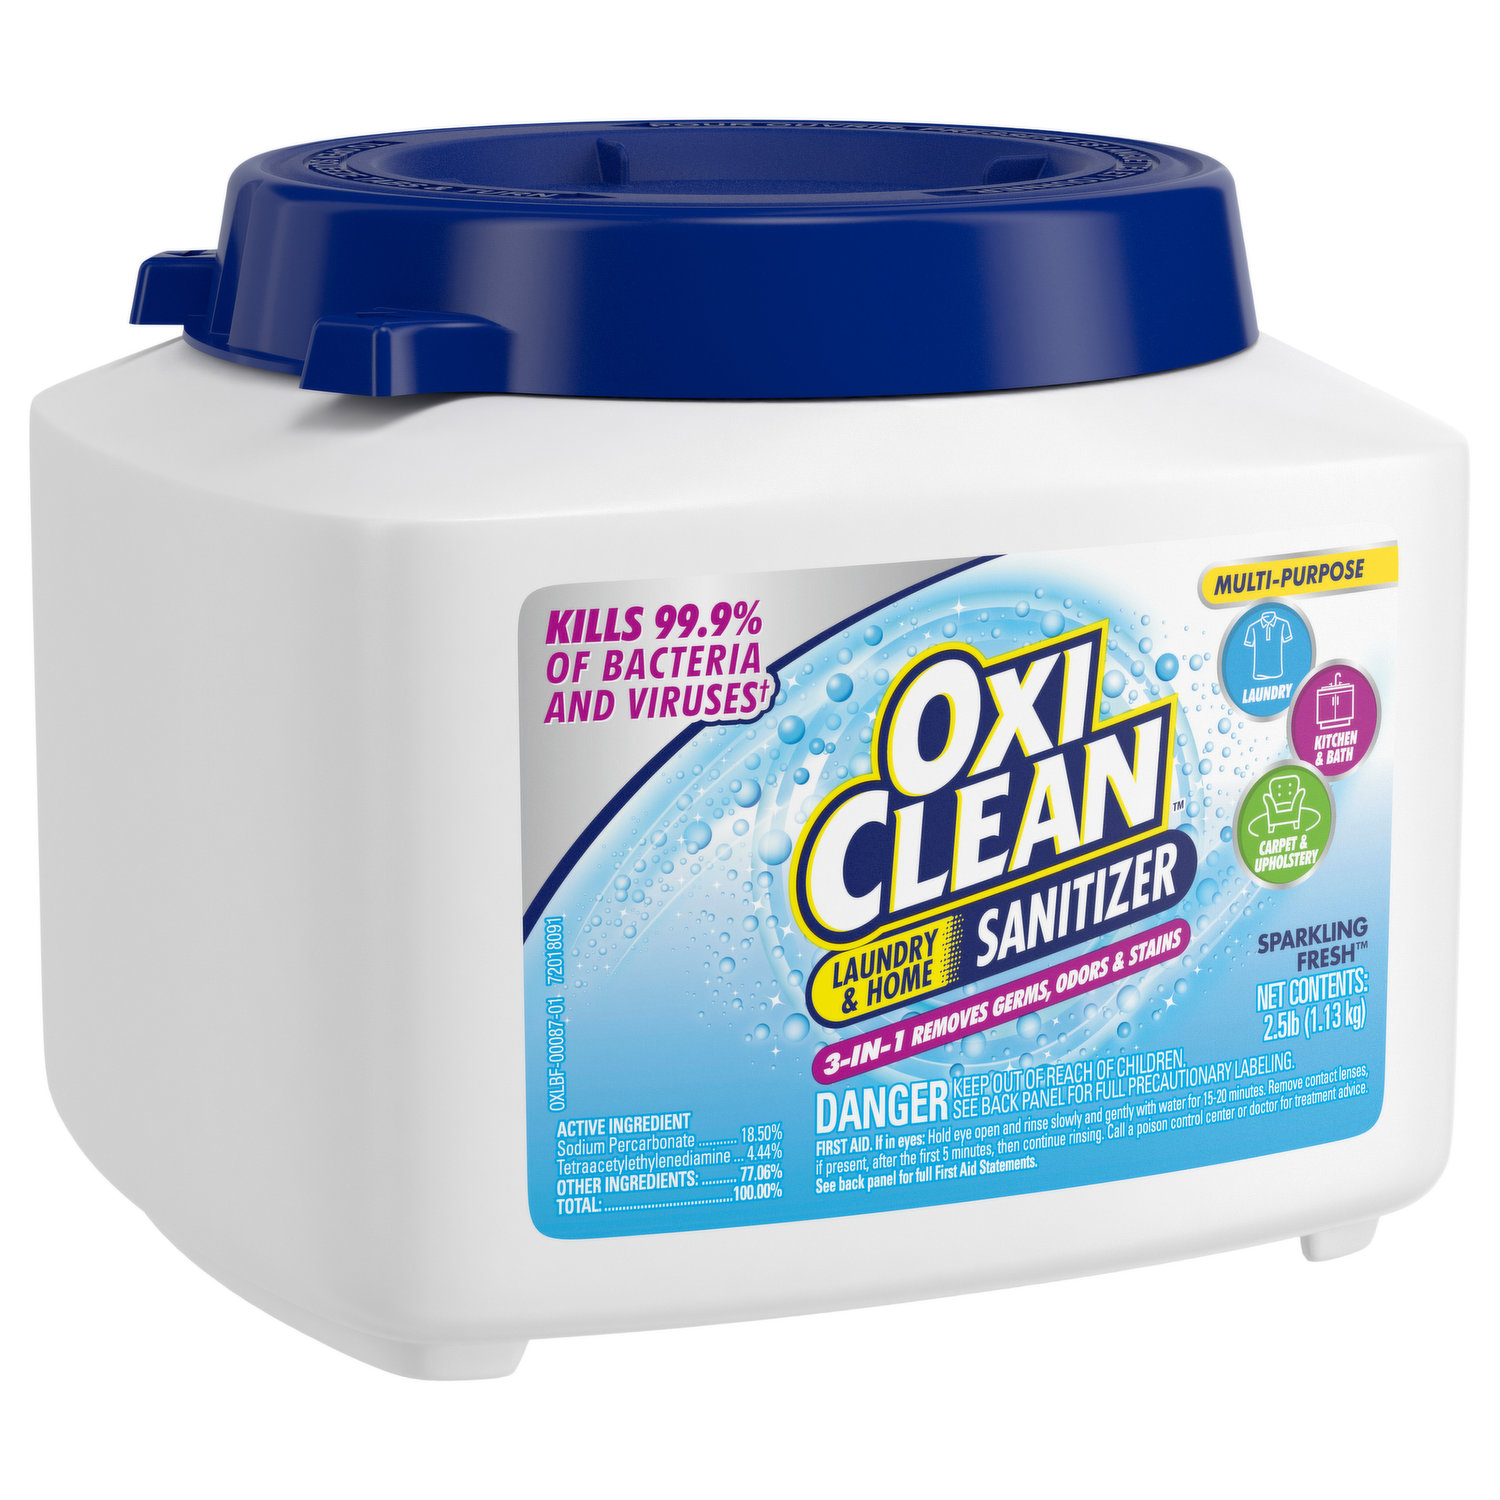 OxiClean Laundry Whitener & Stain Remover